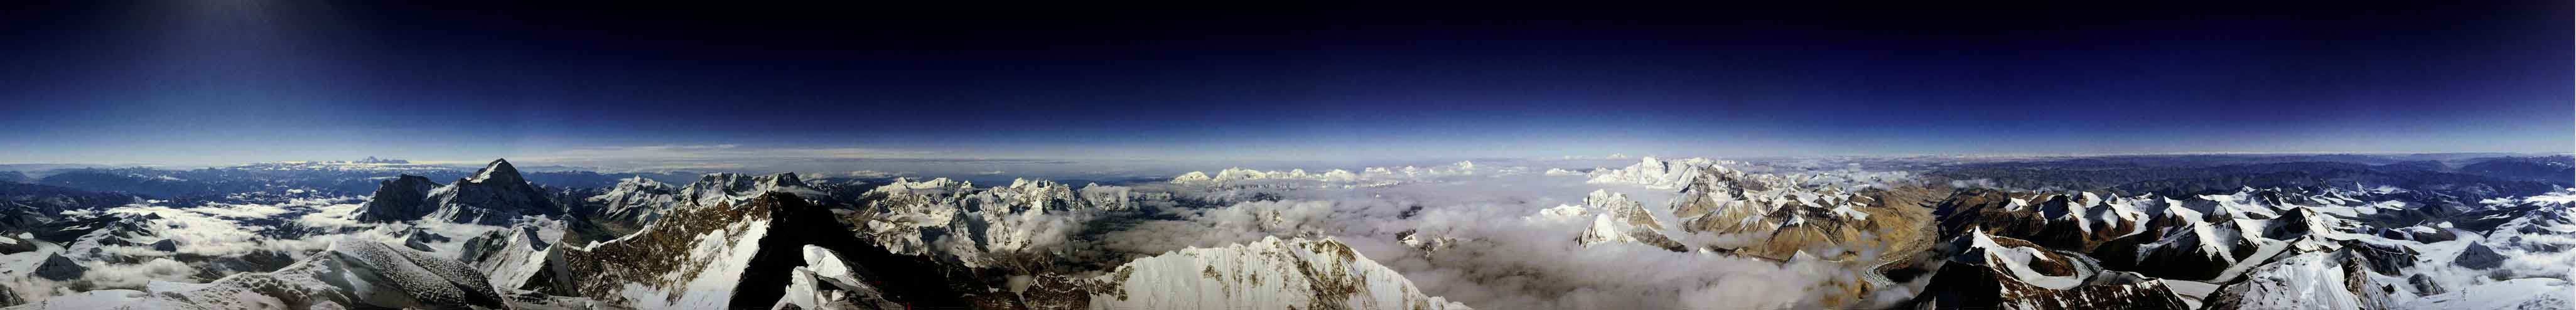 The View from Everest